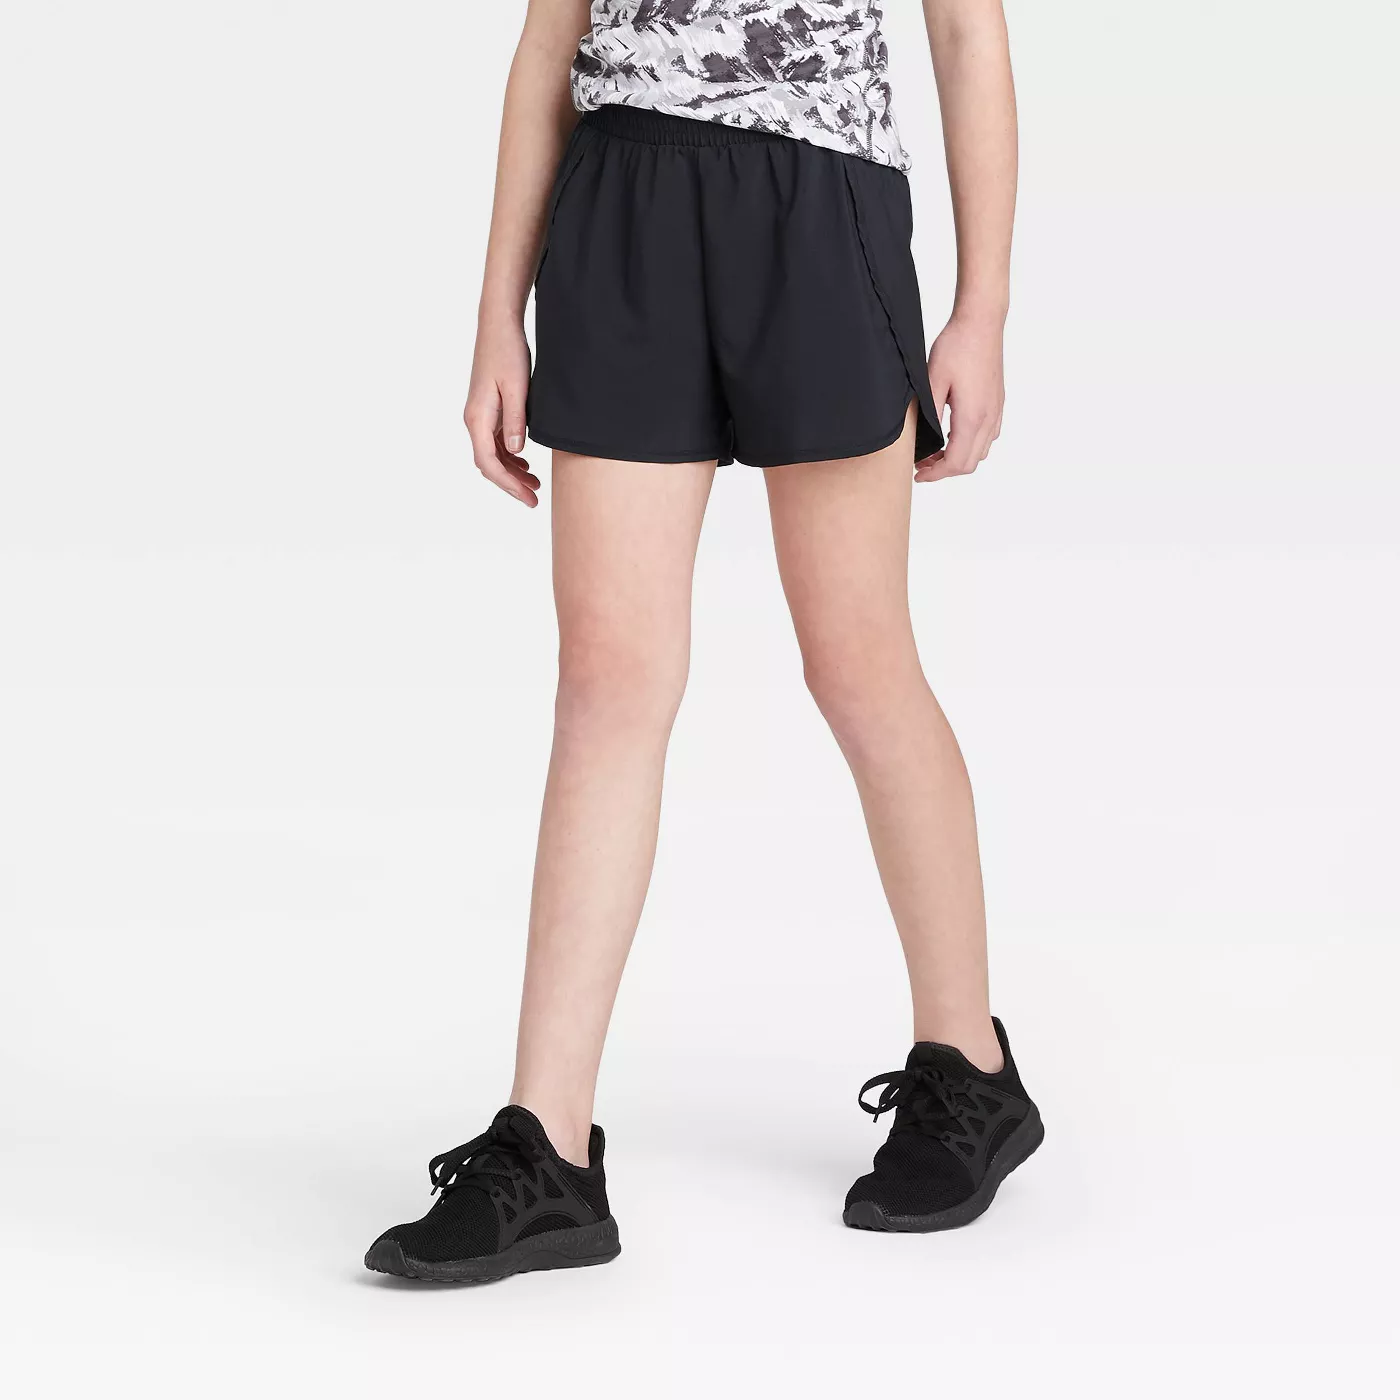 Girls' Run Shorts - All in Motion™ - image 1 of 3